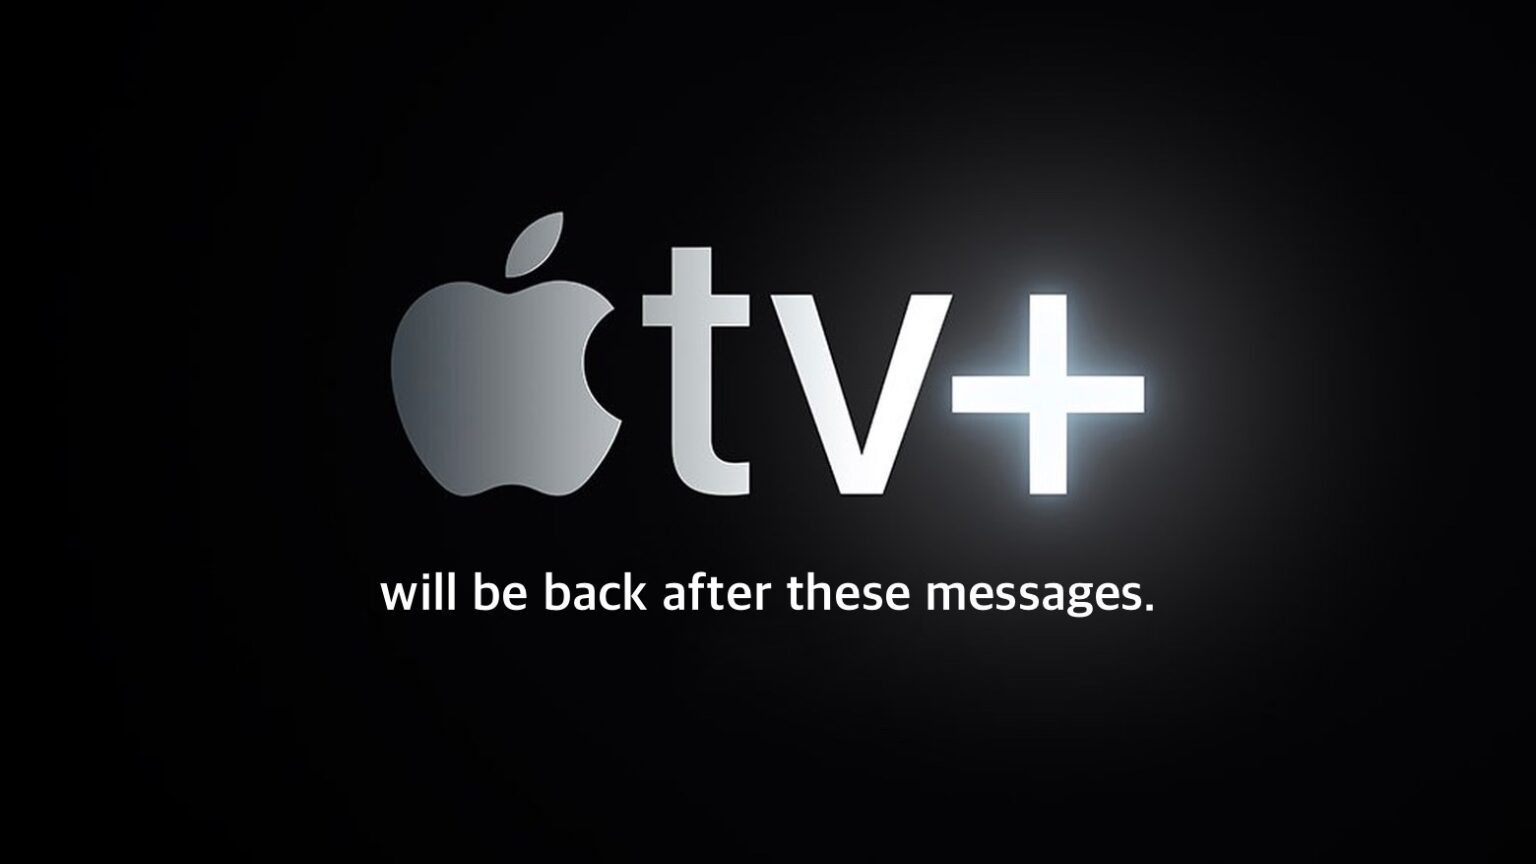 Ads could be coming to Apple TV+